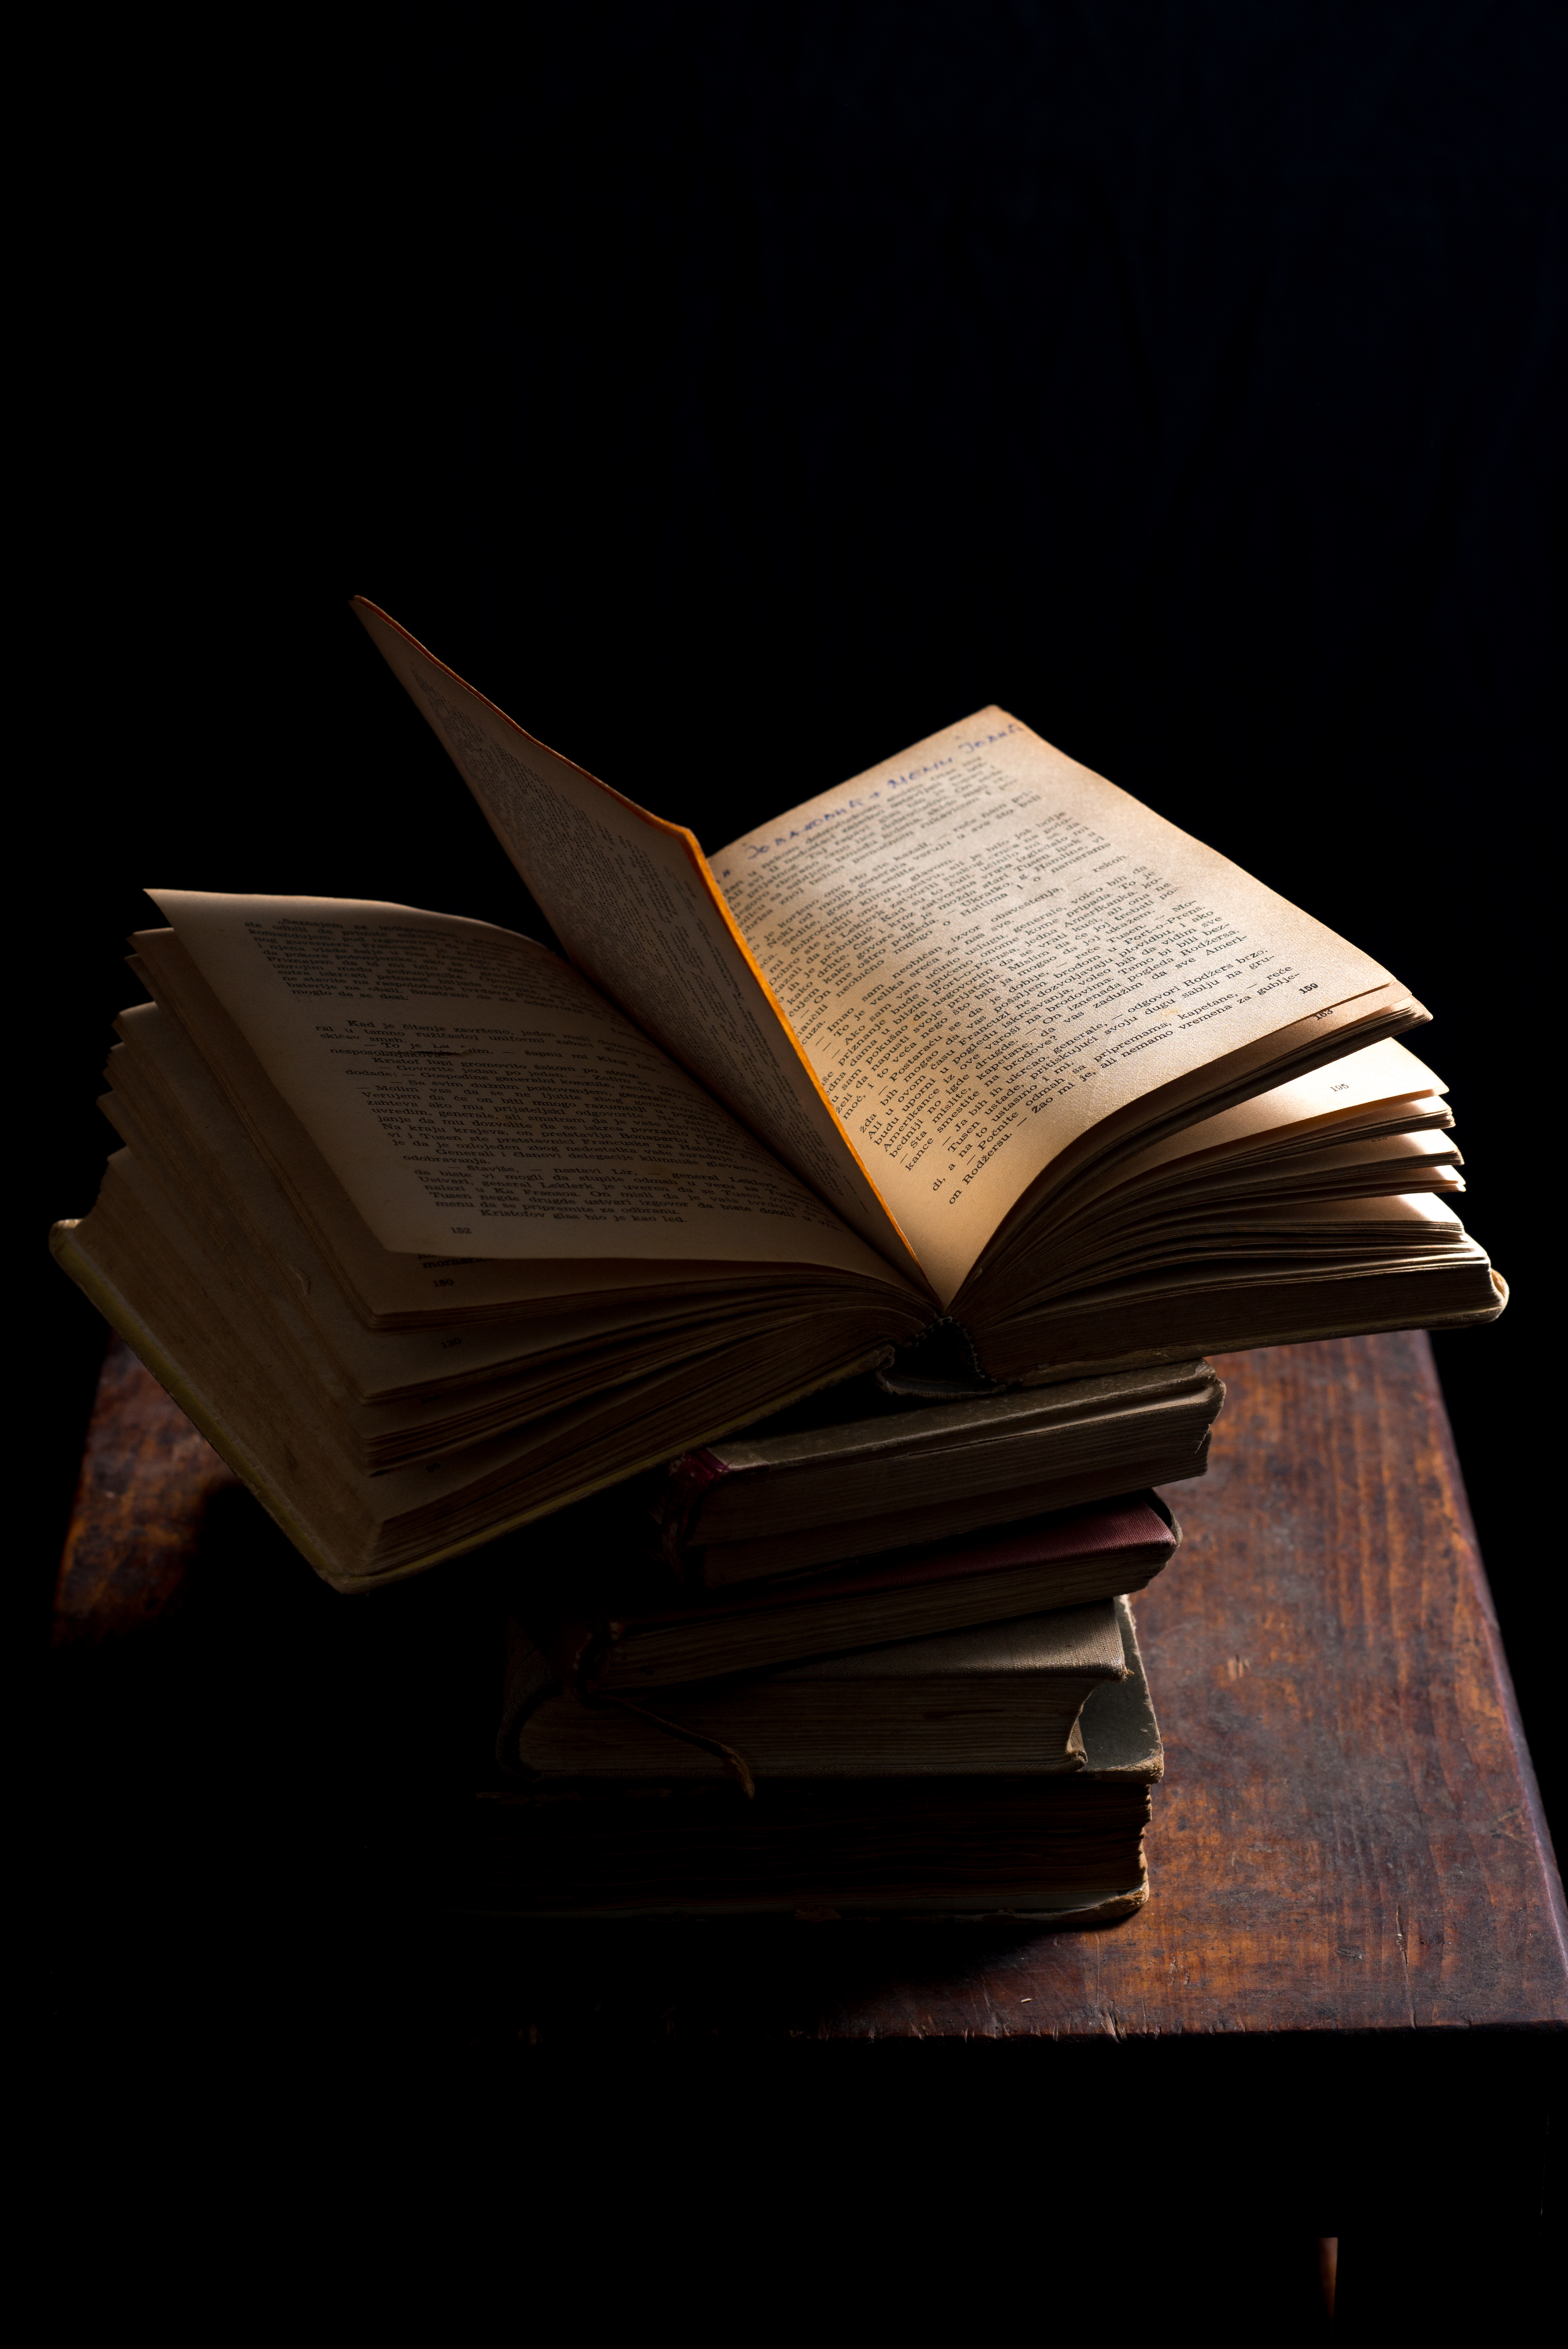 books, miscellanea, miscellaneous, darkness, table, pages, page download HD wallpaper